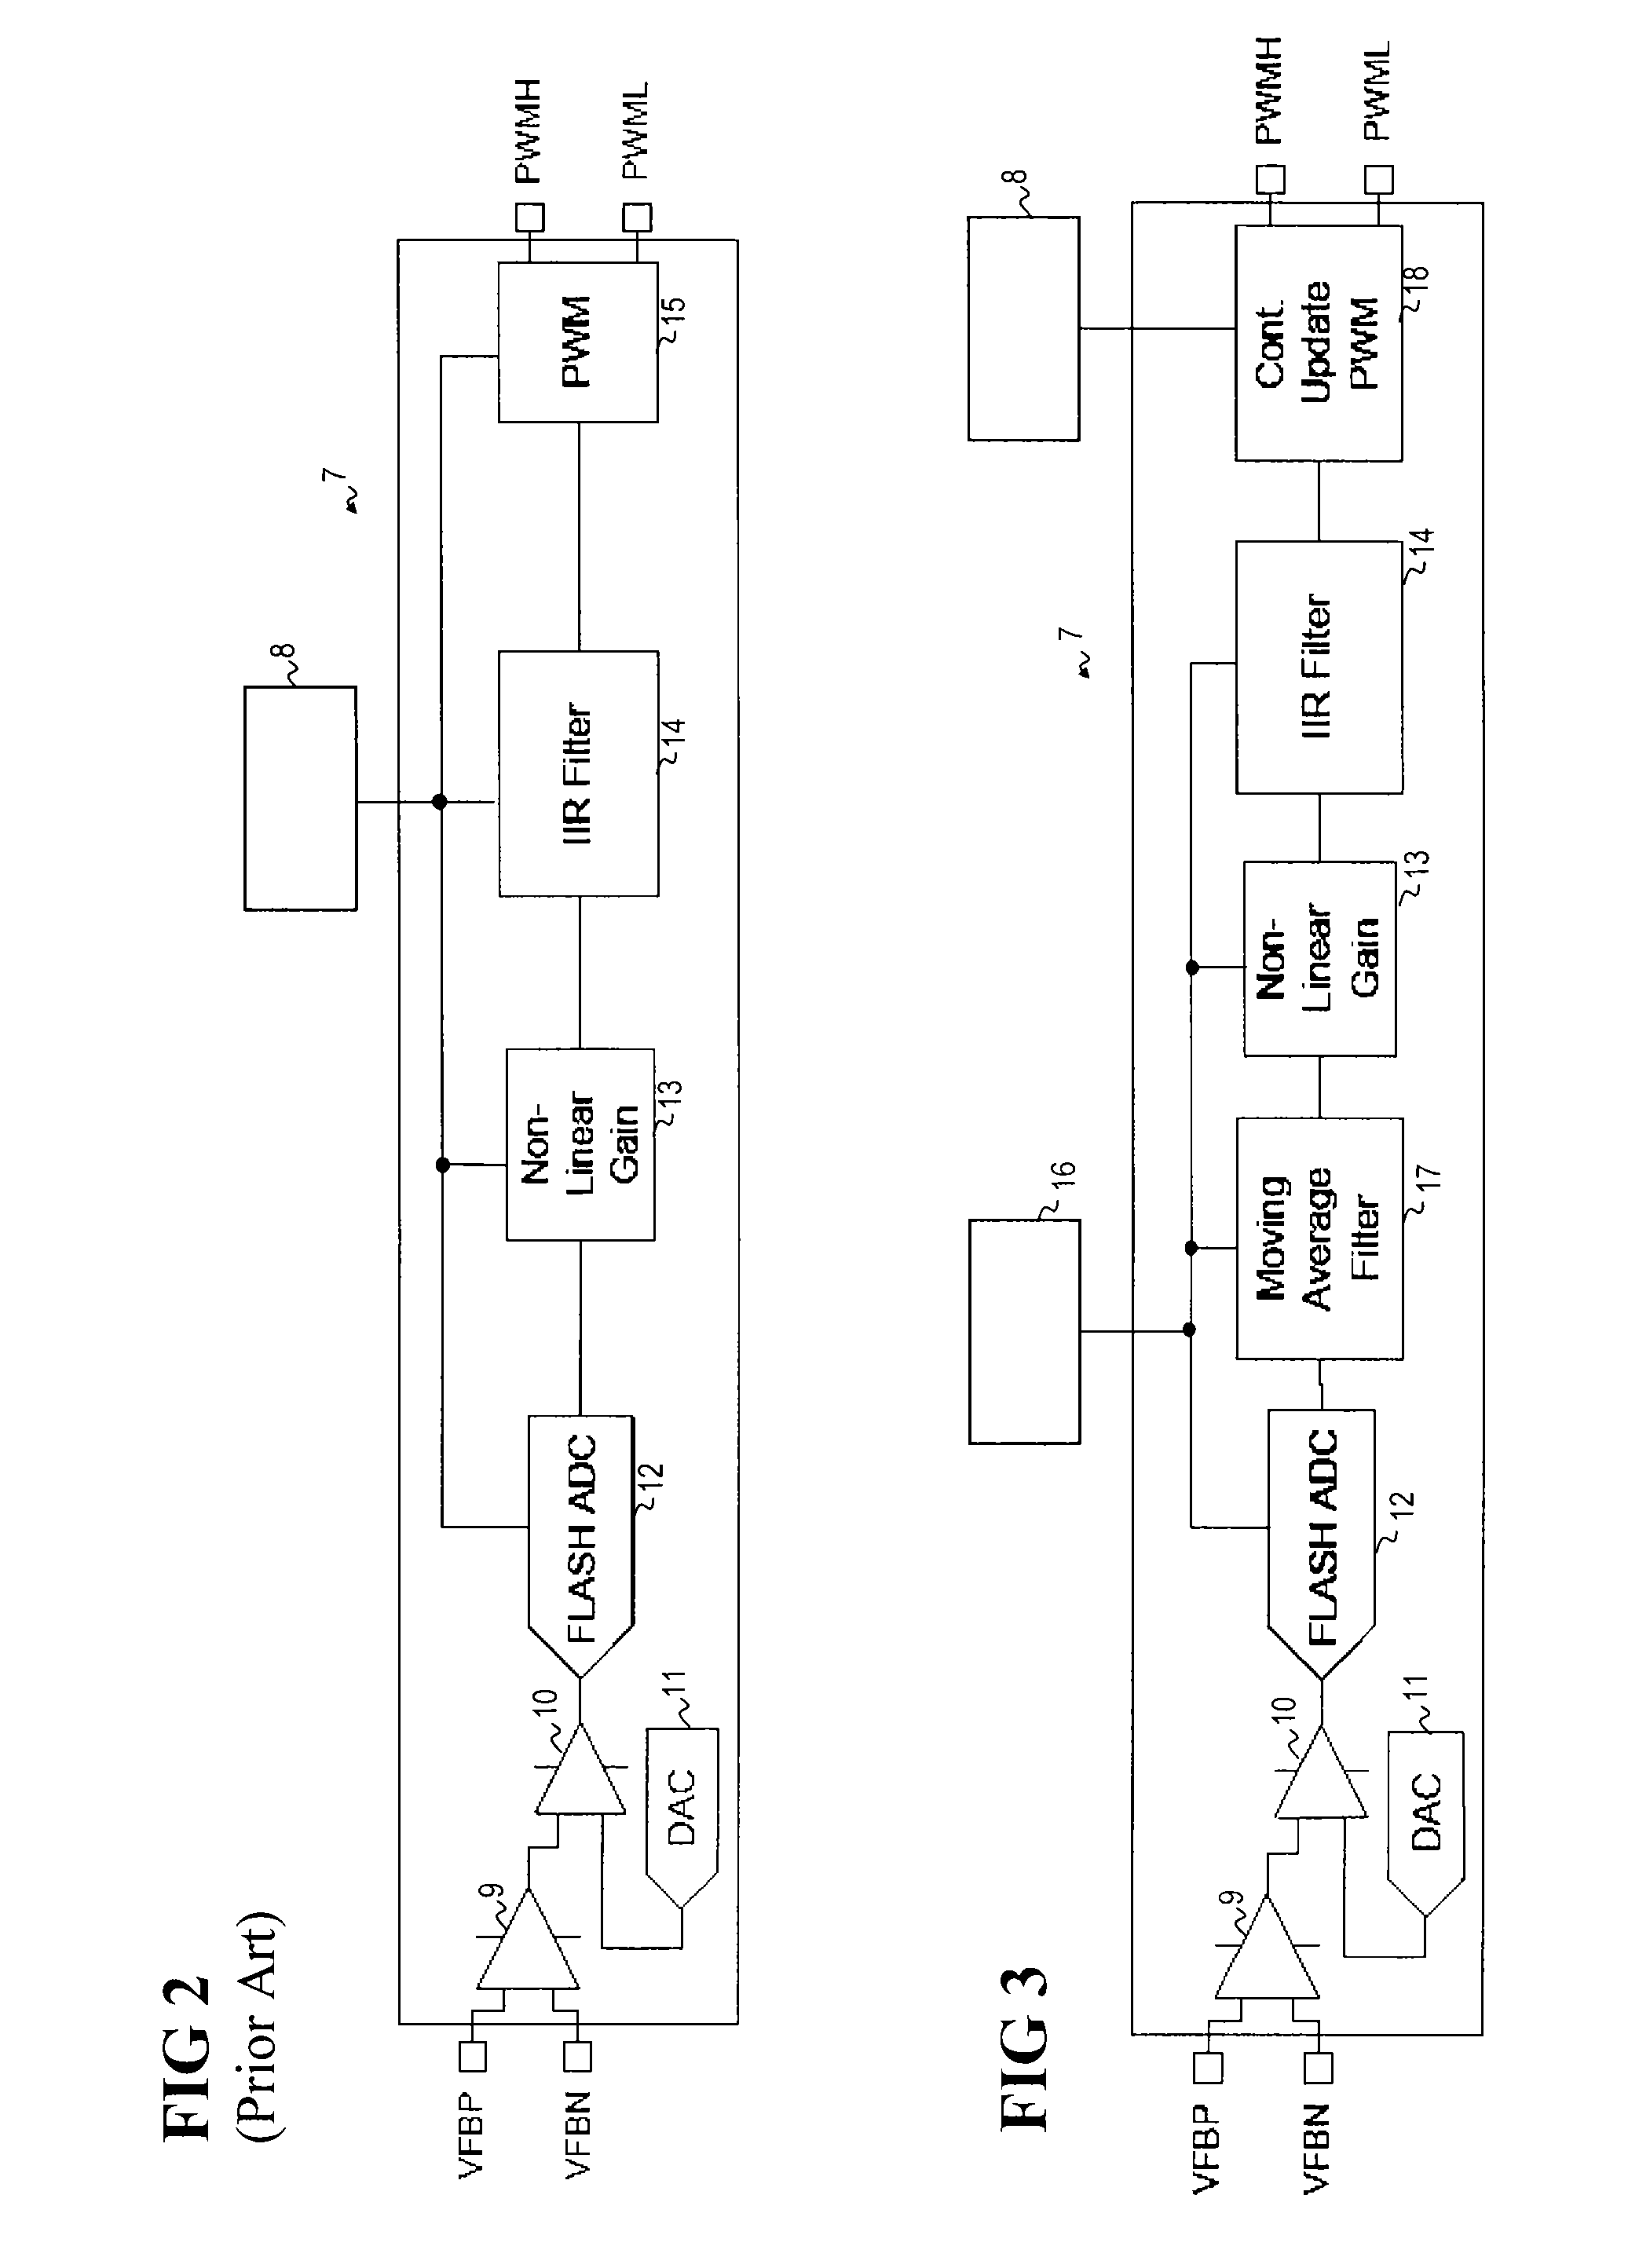 Method for the closed-loop control of a buck converter and arrangement for implementing the method